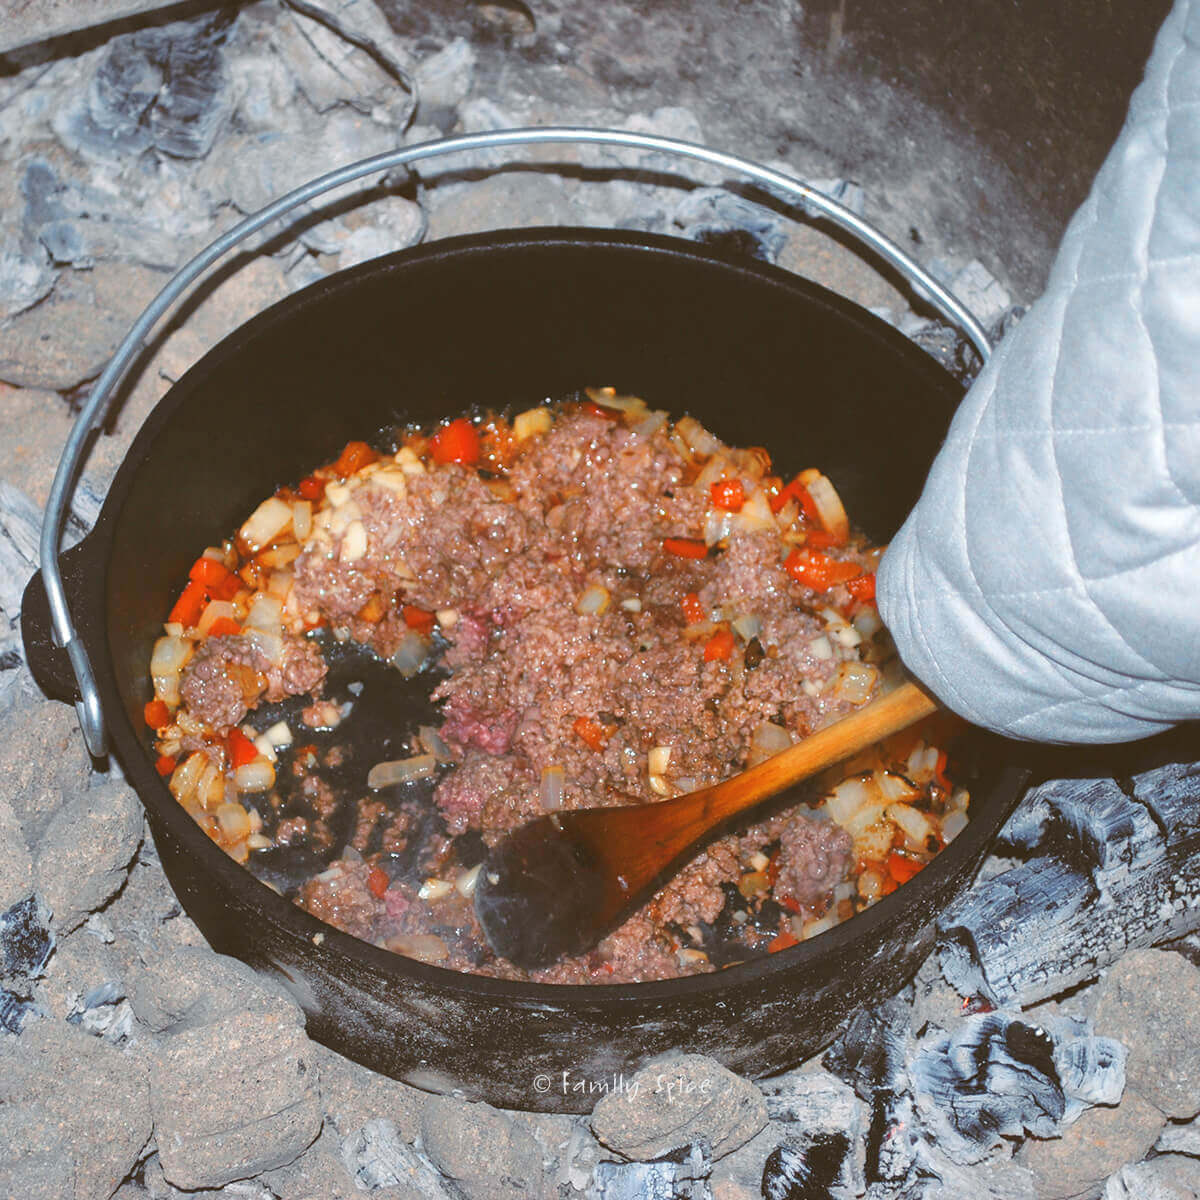 Browning ground beef with onions and peppers in a cast iron dutch oven